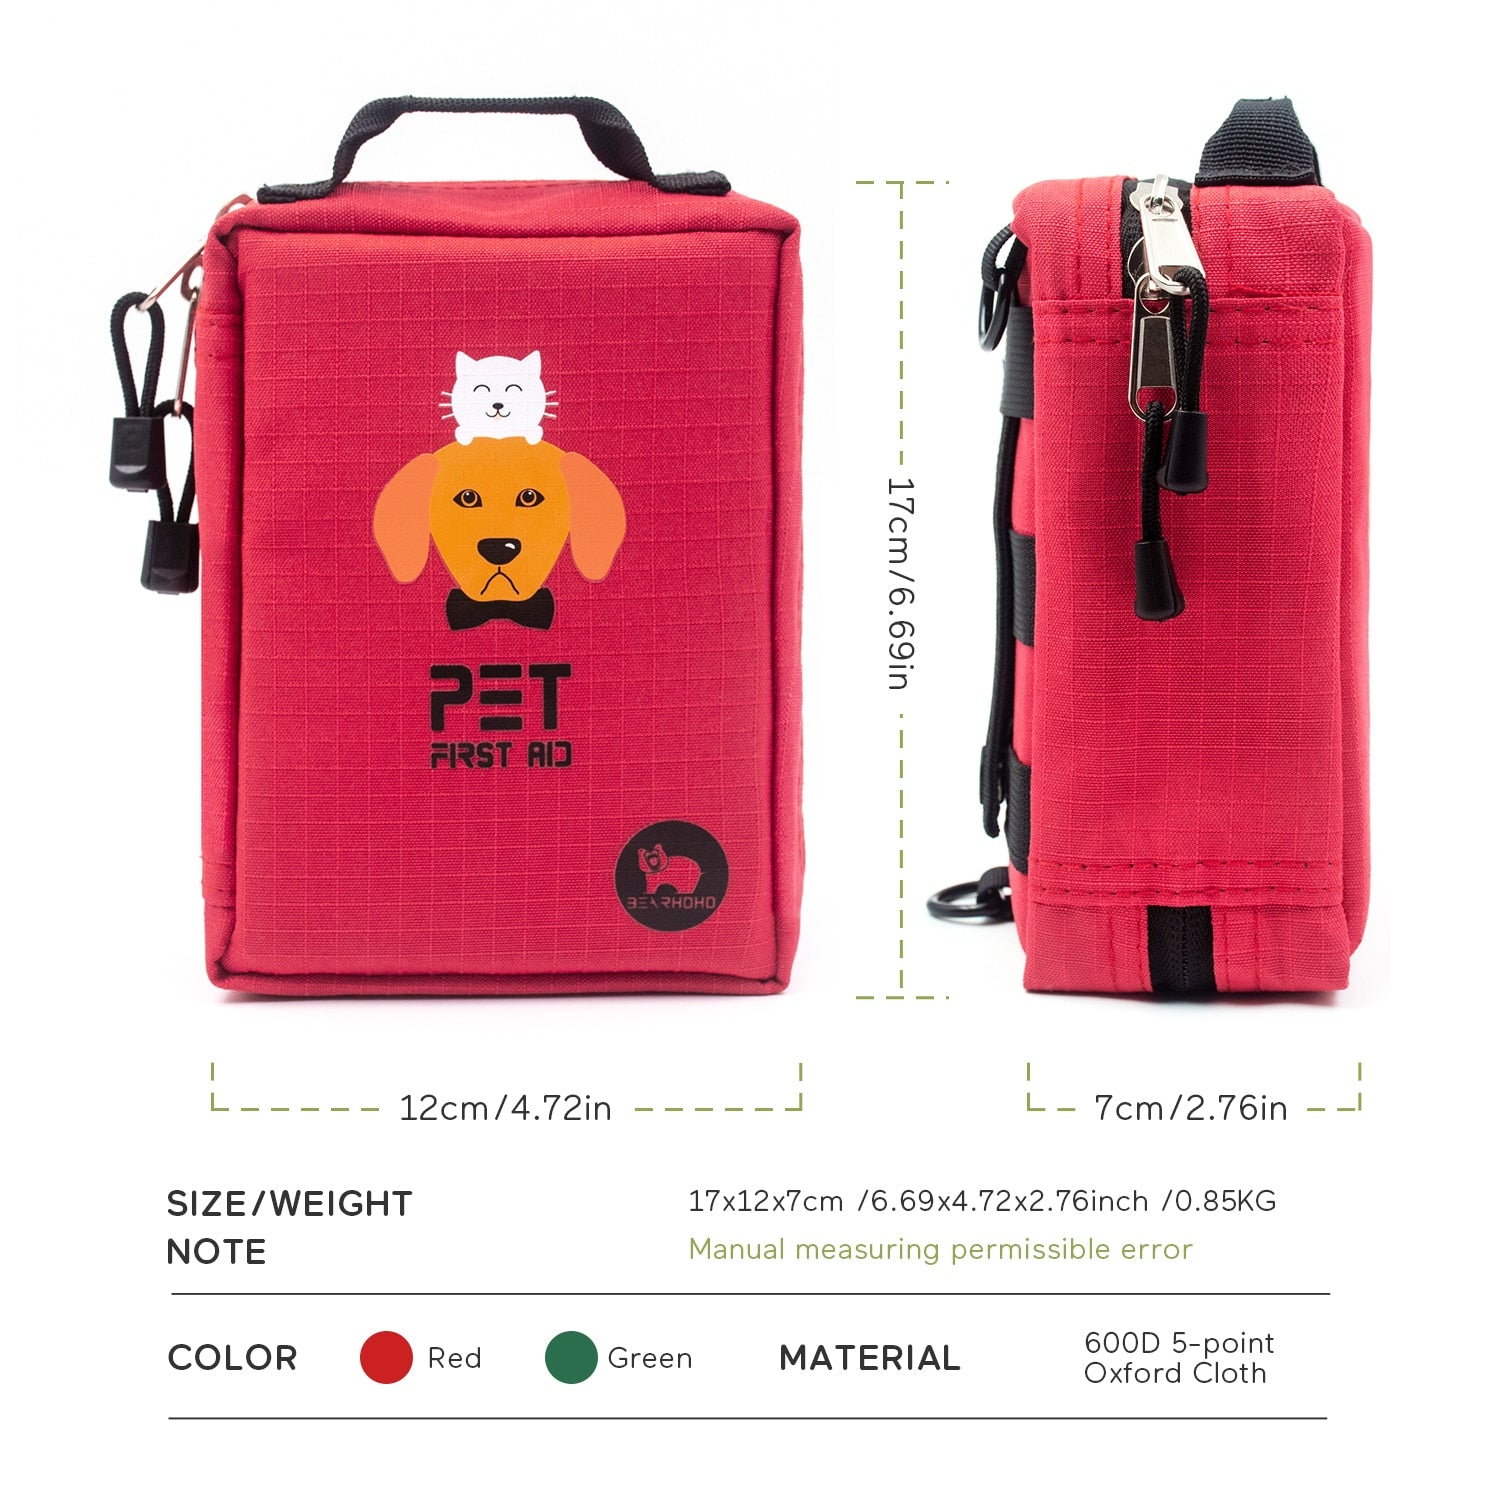 Dog/Cat First Aid Kit, 160pcs w/Lightweight Waterproof Case, Perfect For Camping!